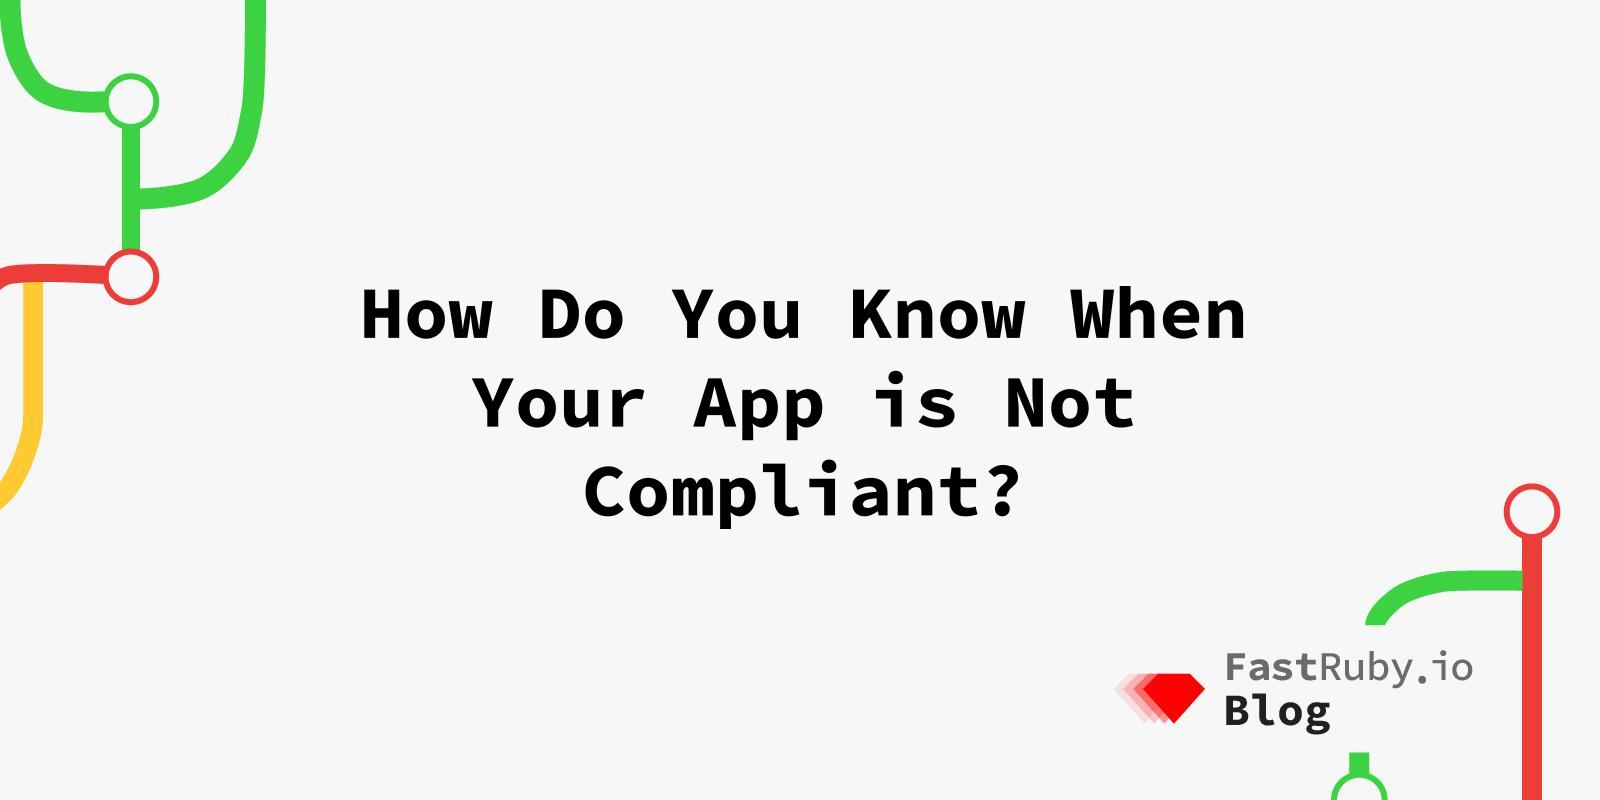 How Do You Know When Your App is Not Compliant?